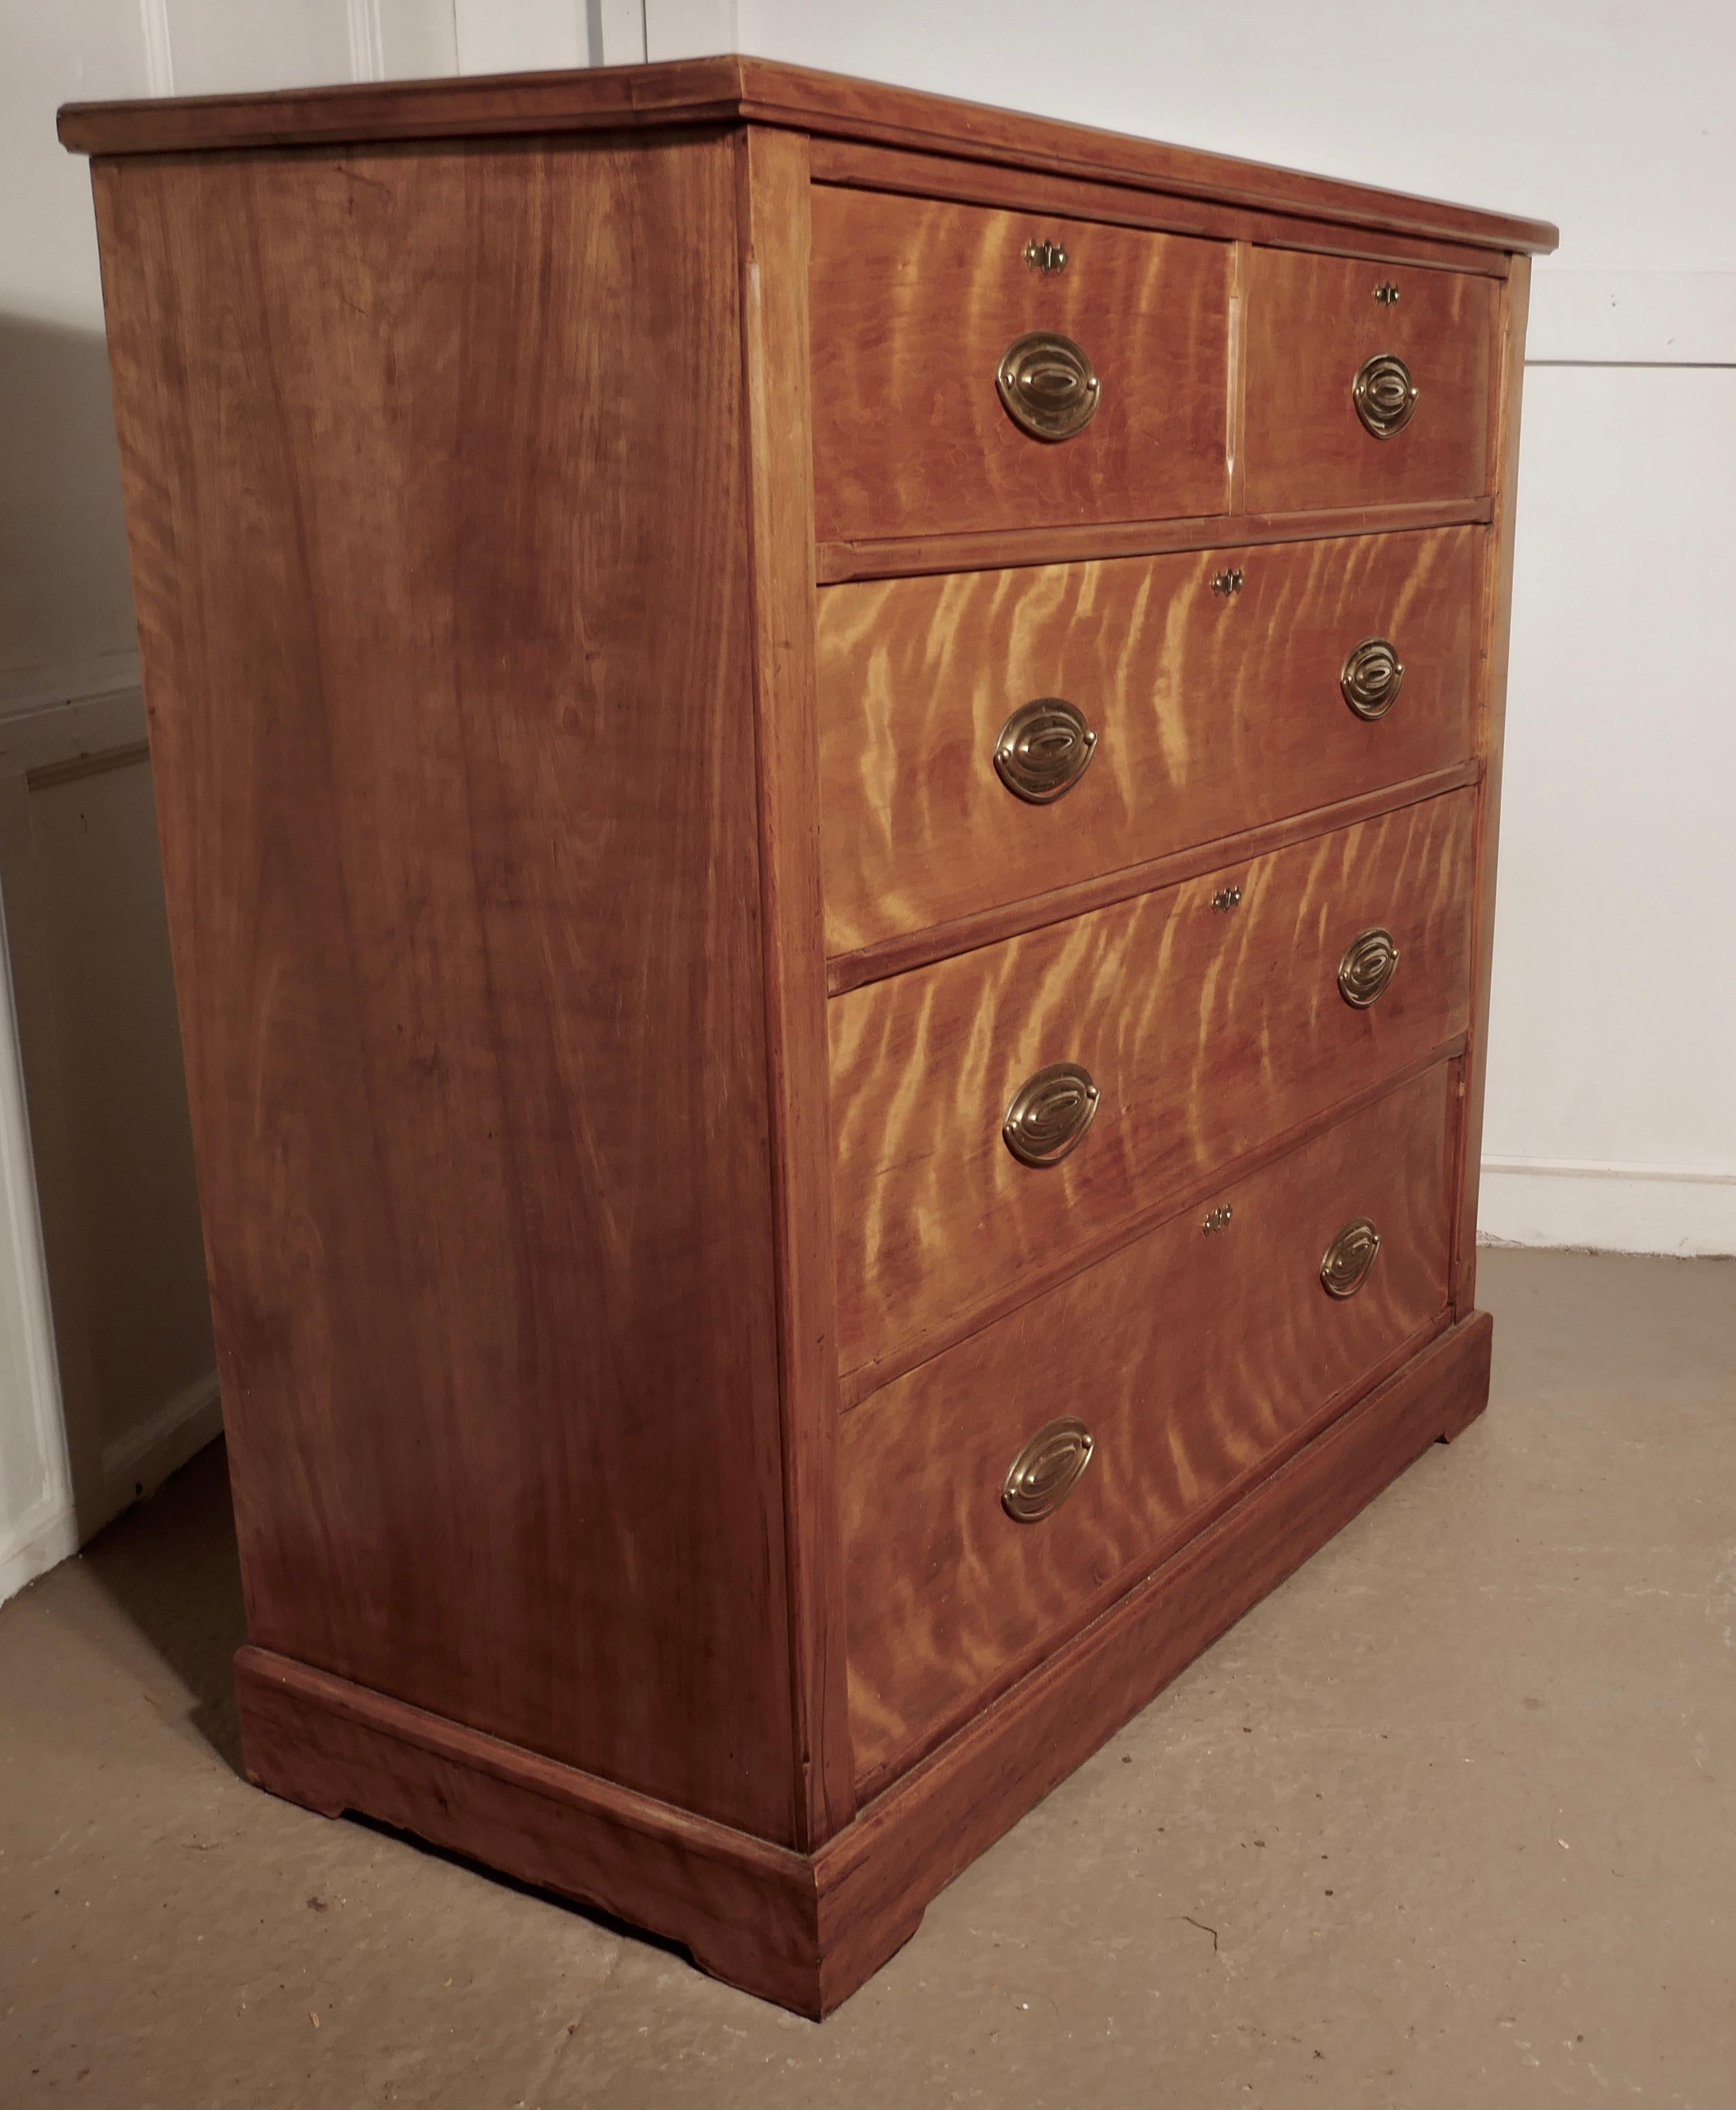 Large 19th century birch chest of drawers

This lovely large chest is has 2 short drawers over three graduated drawers and a sold top with an attractive moulded edge
The chest has been beautifully restored, with new handles and escutcheons, all